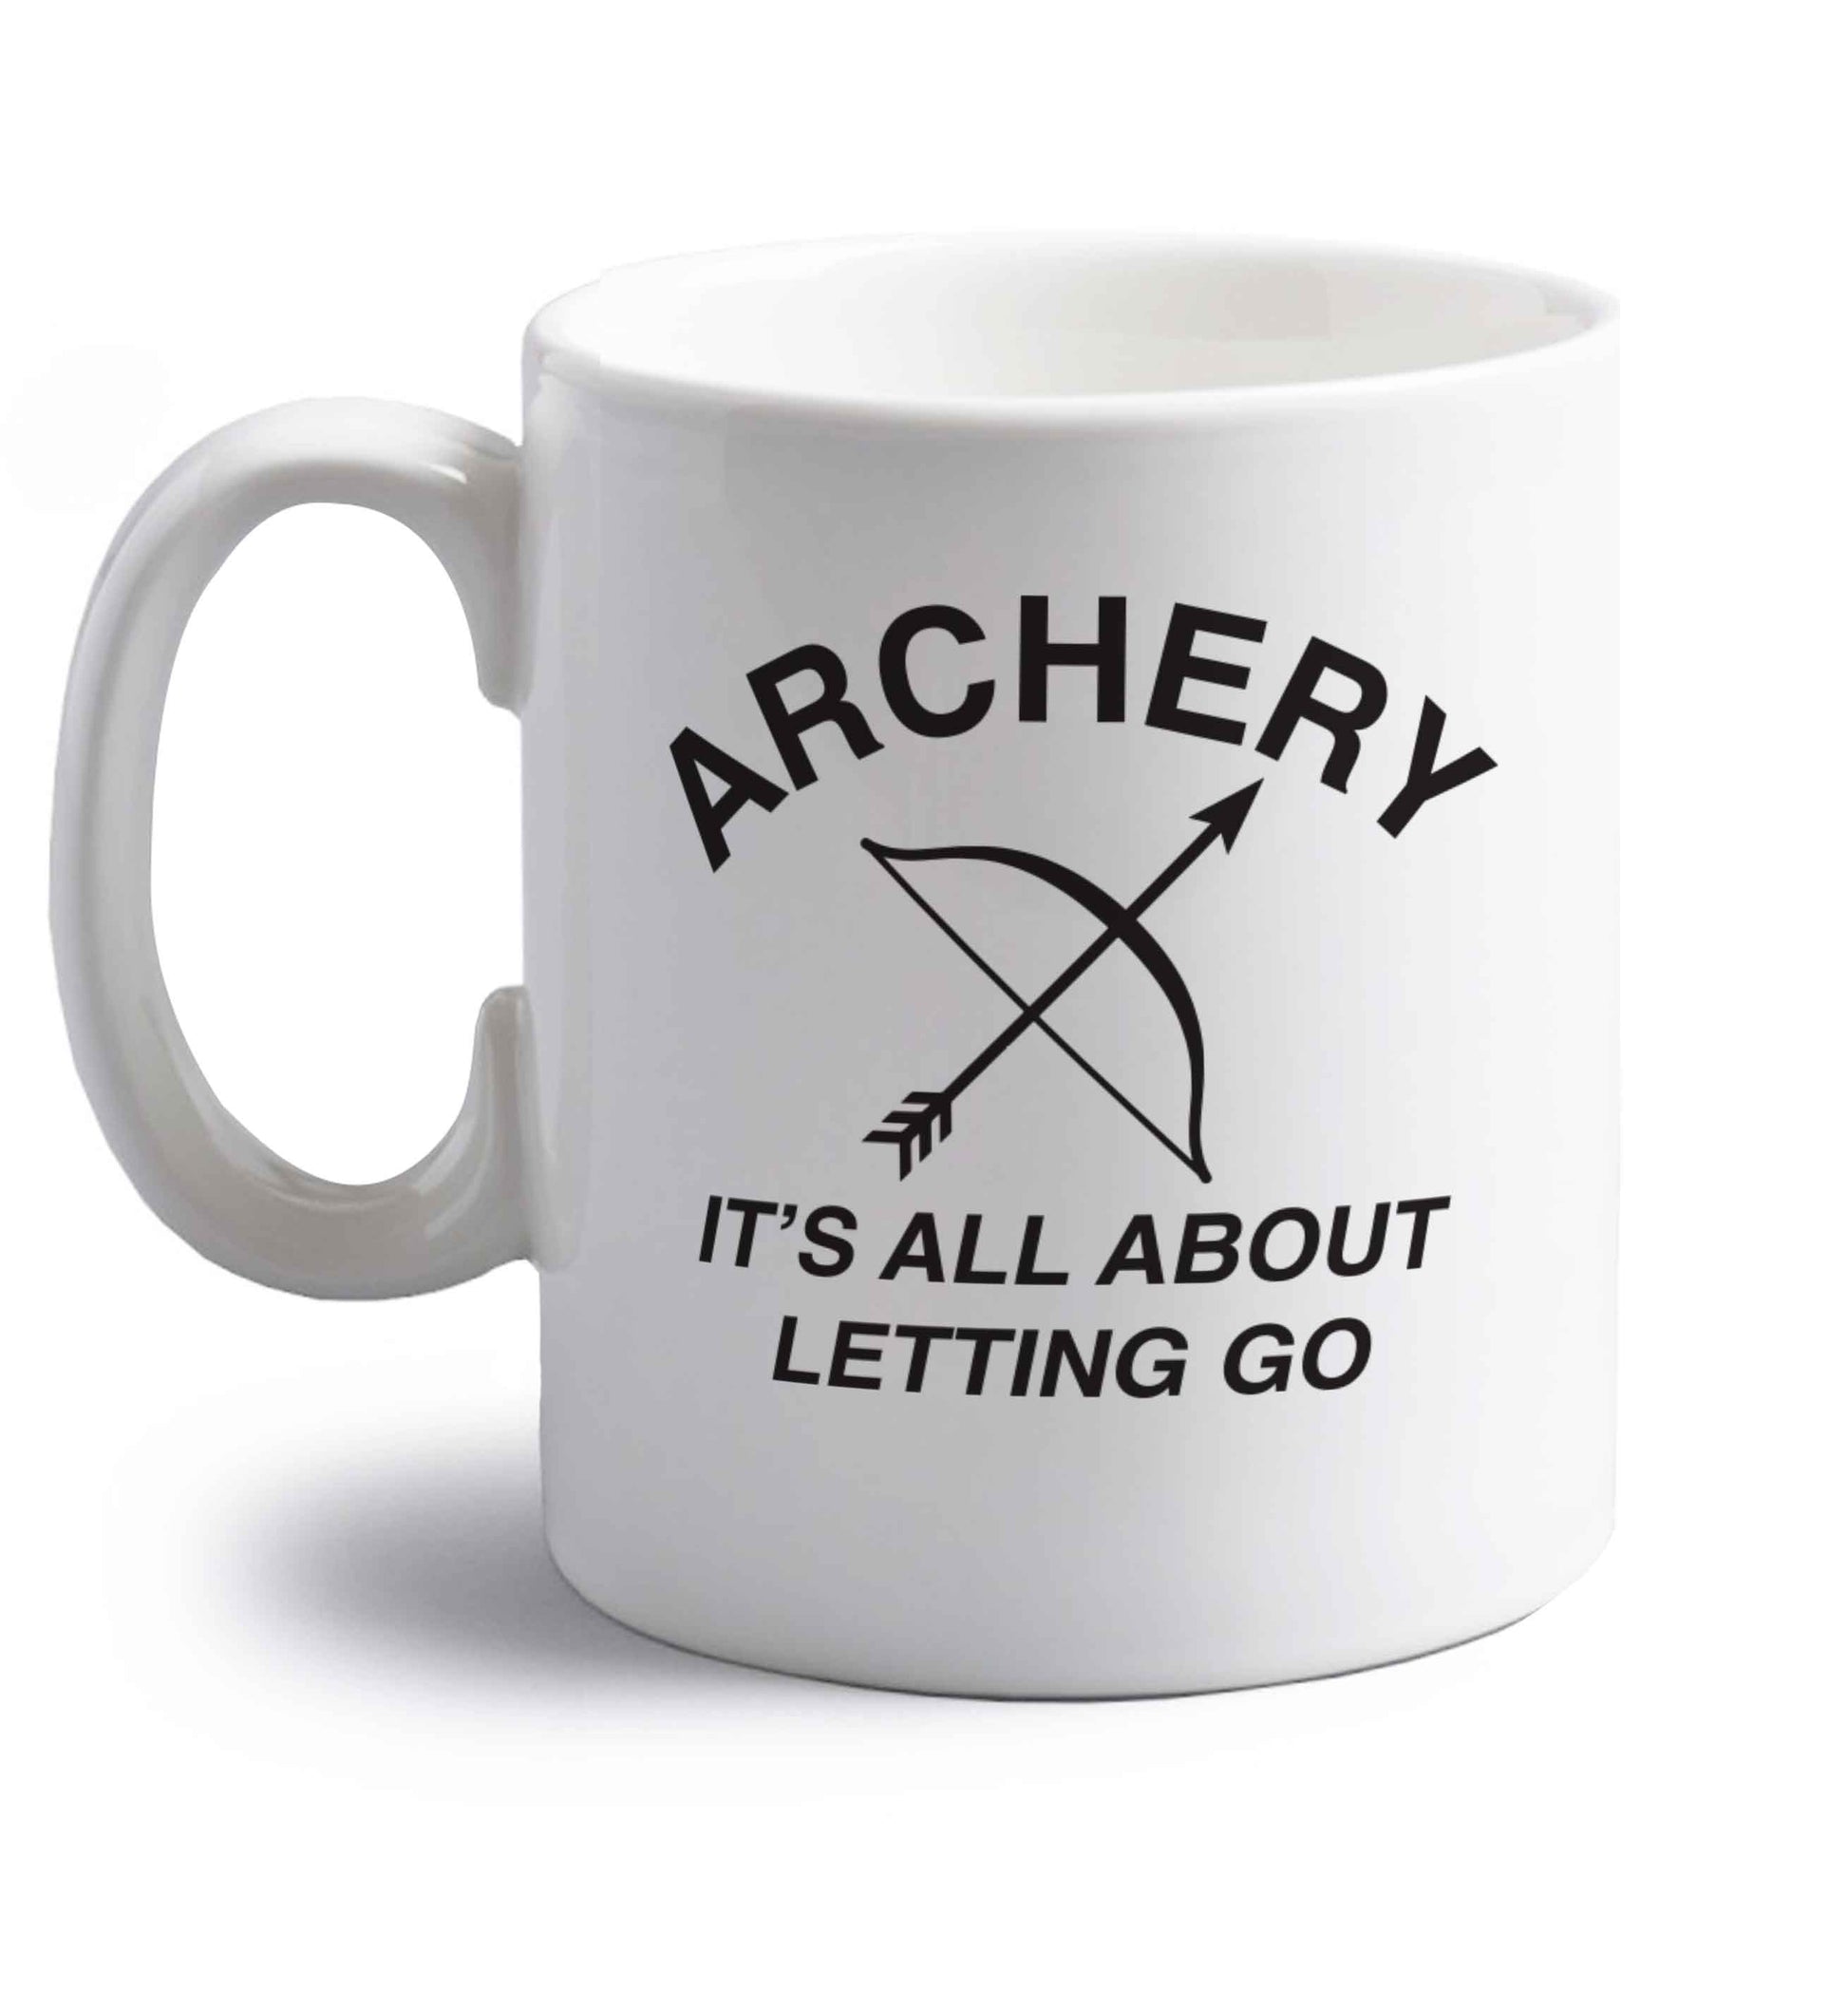 Archery it's all about letting go right handed white ceramic mug 